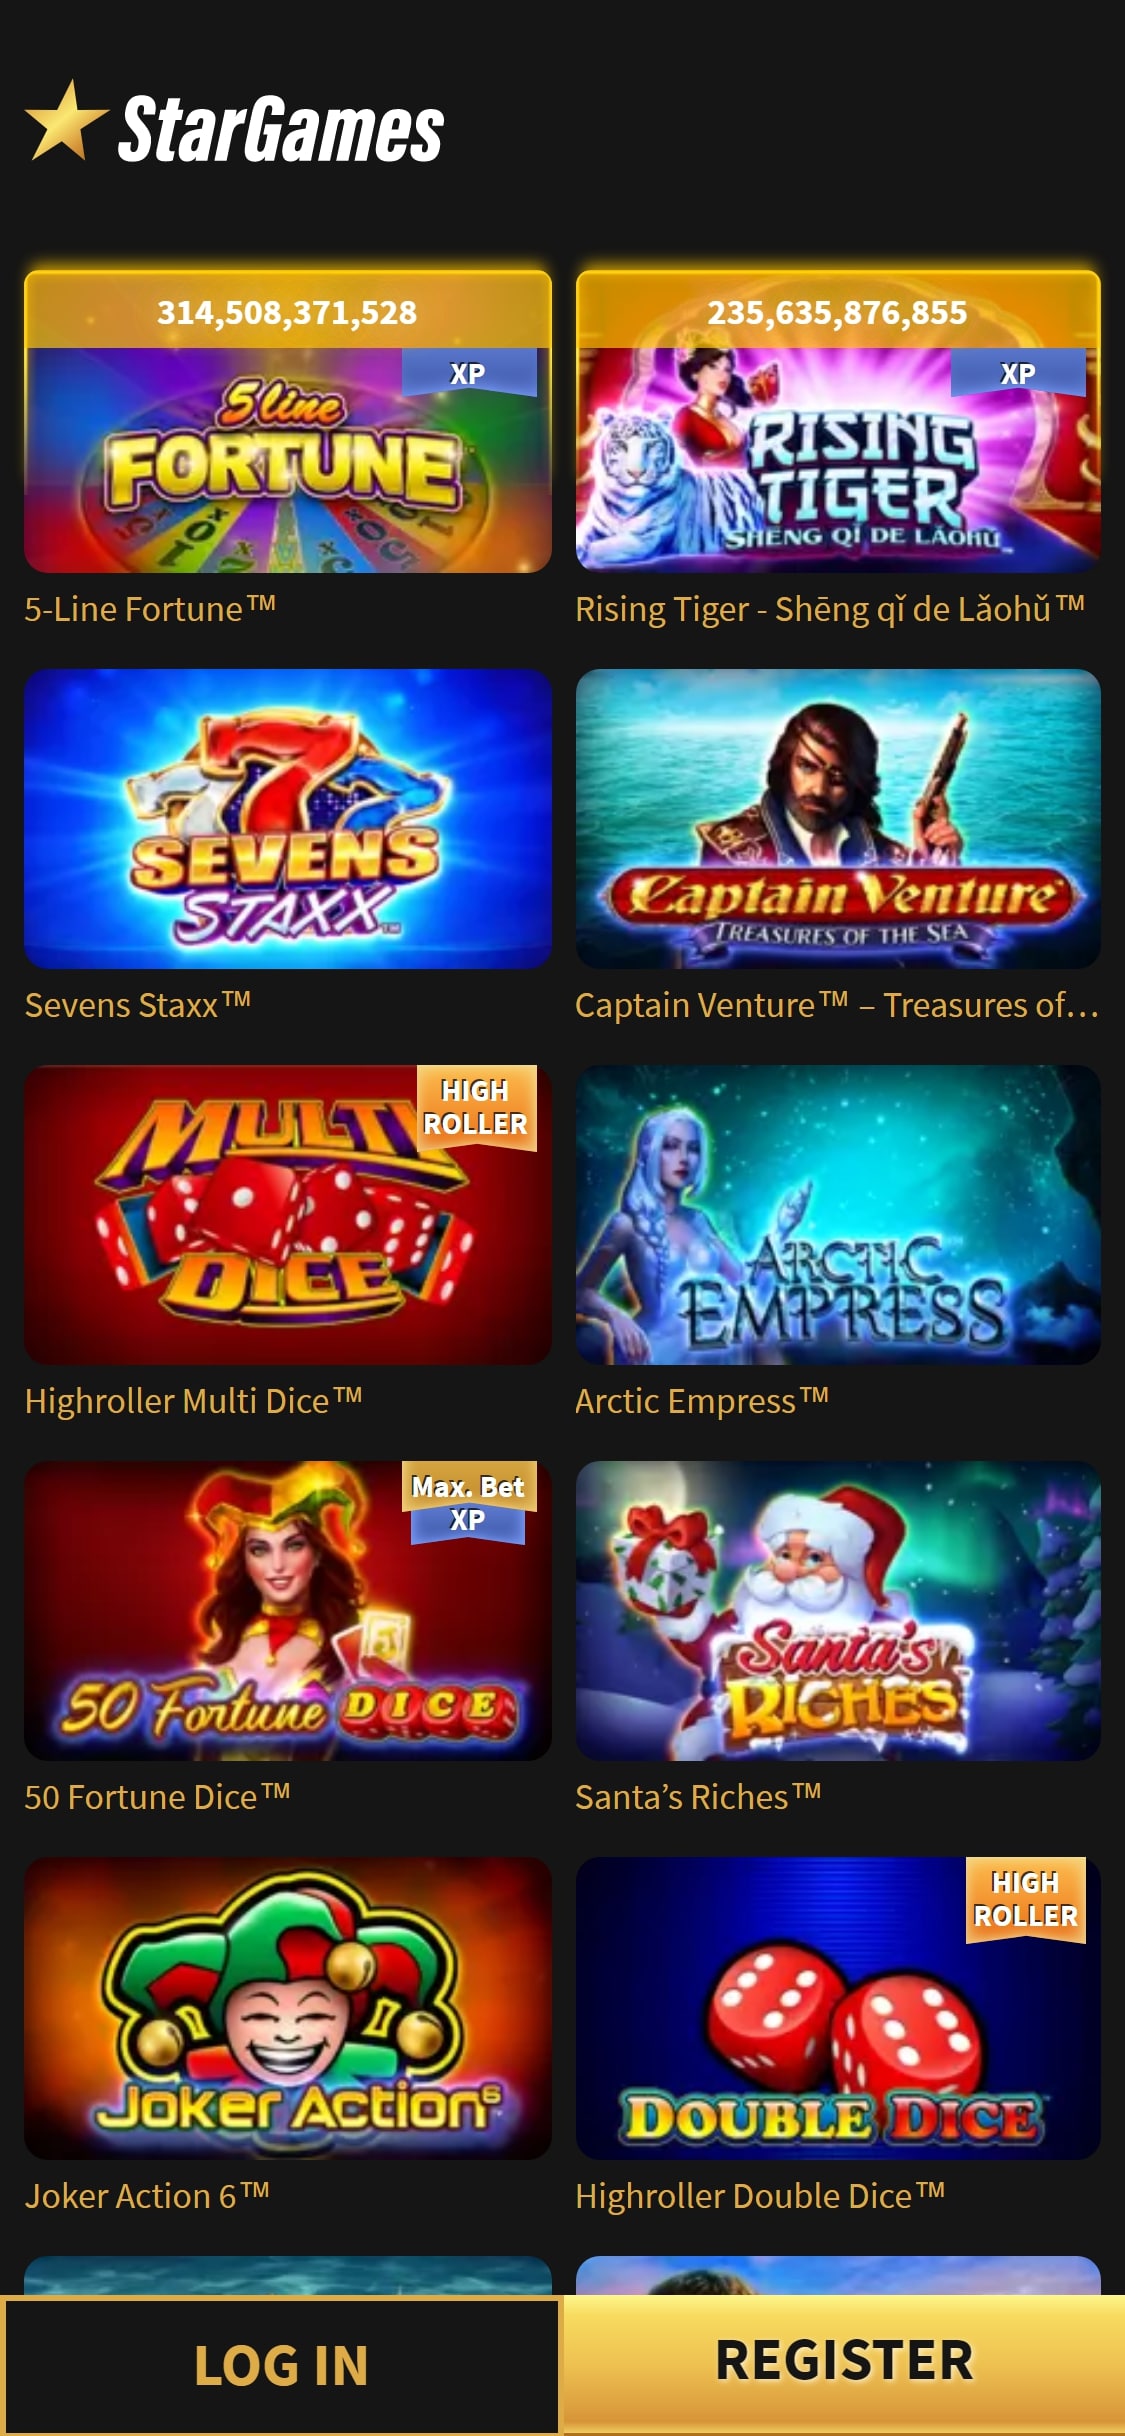 Star Games Casino Mobile Games Review